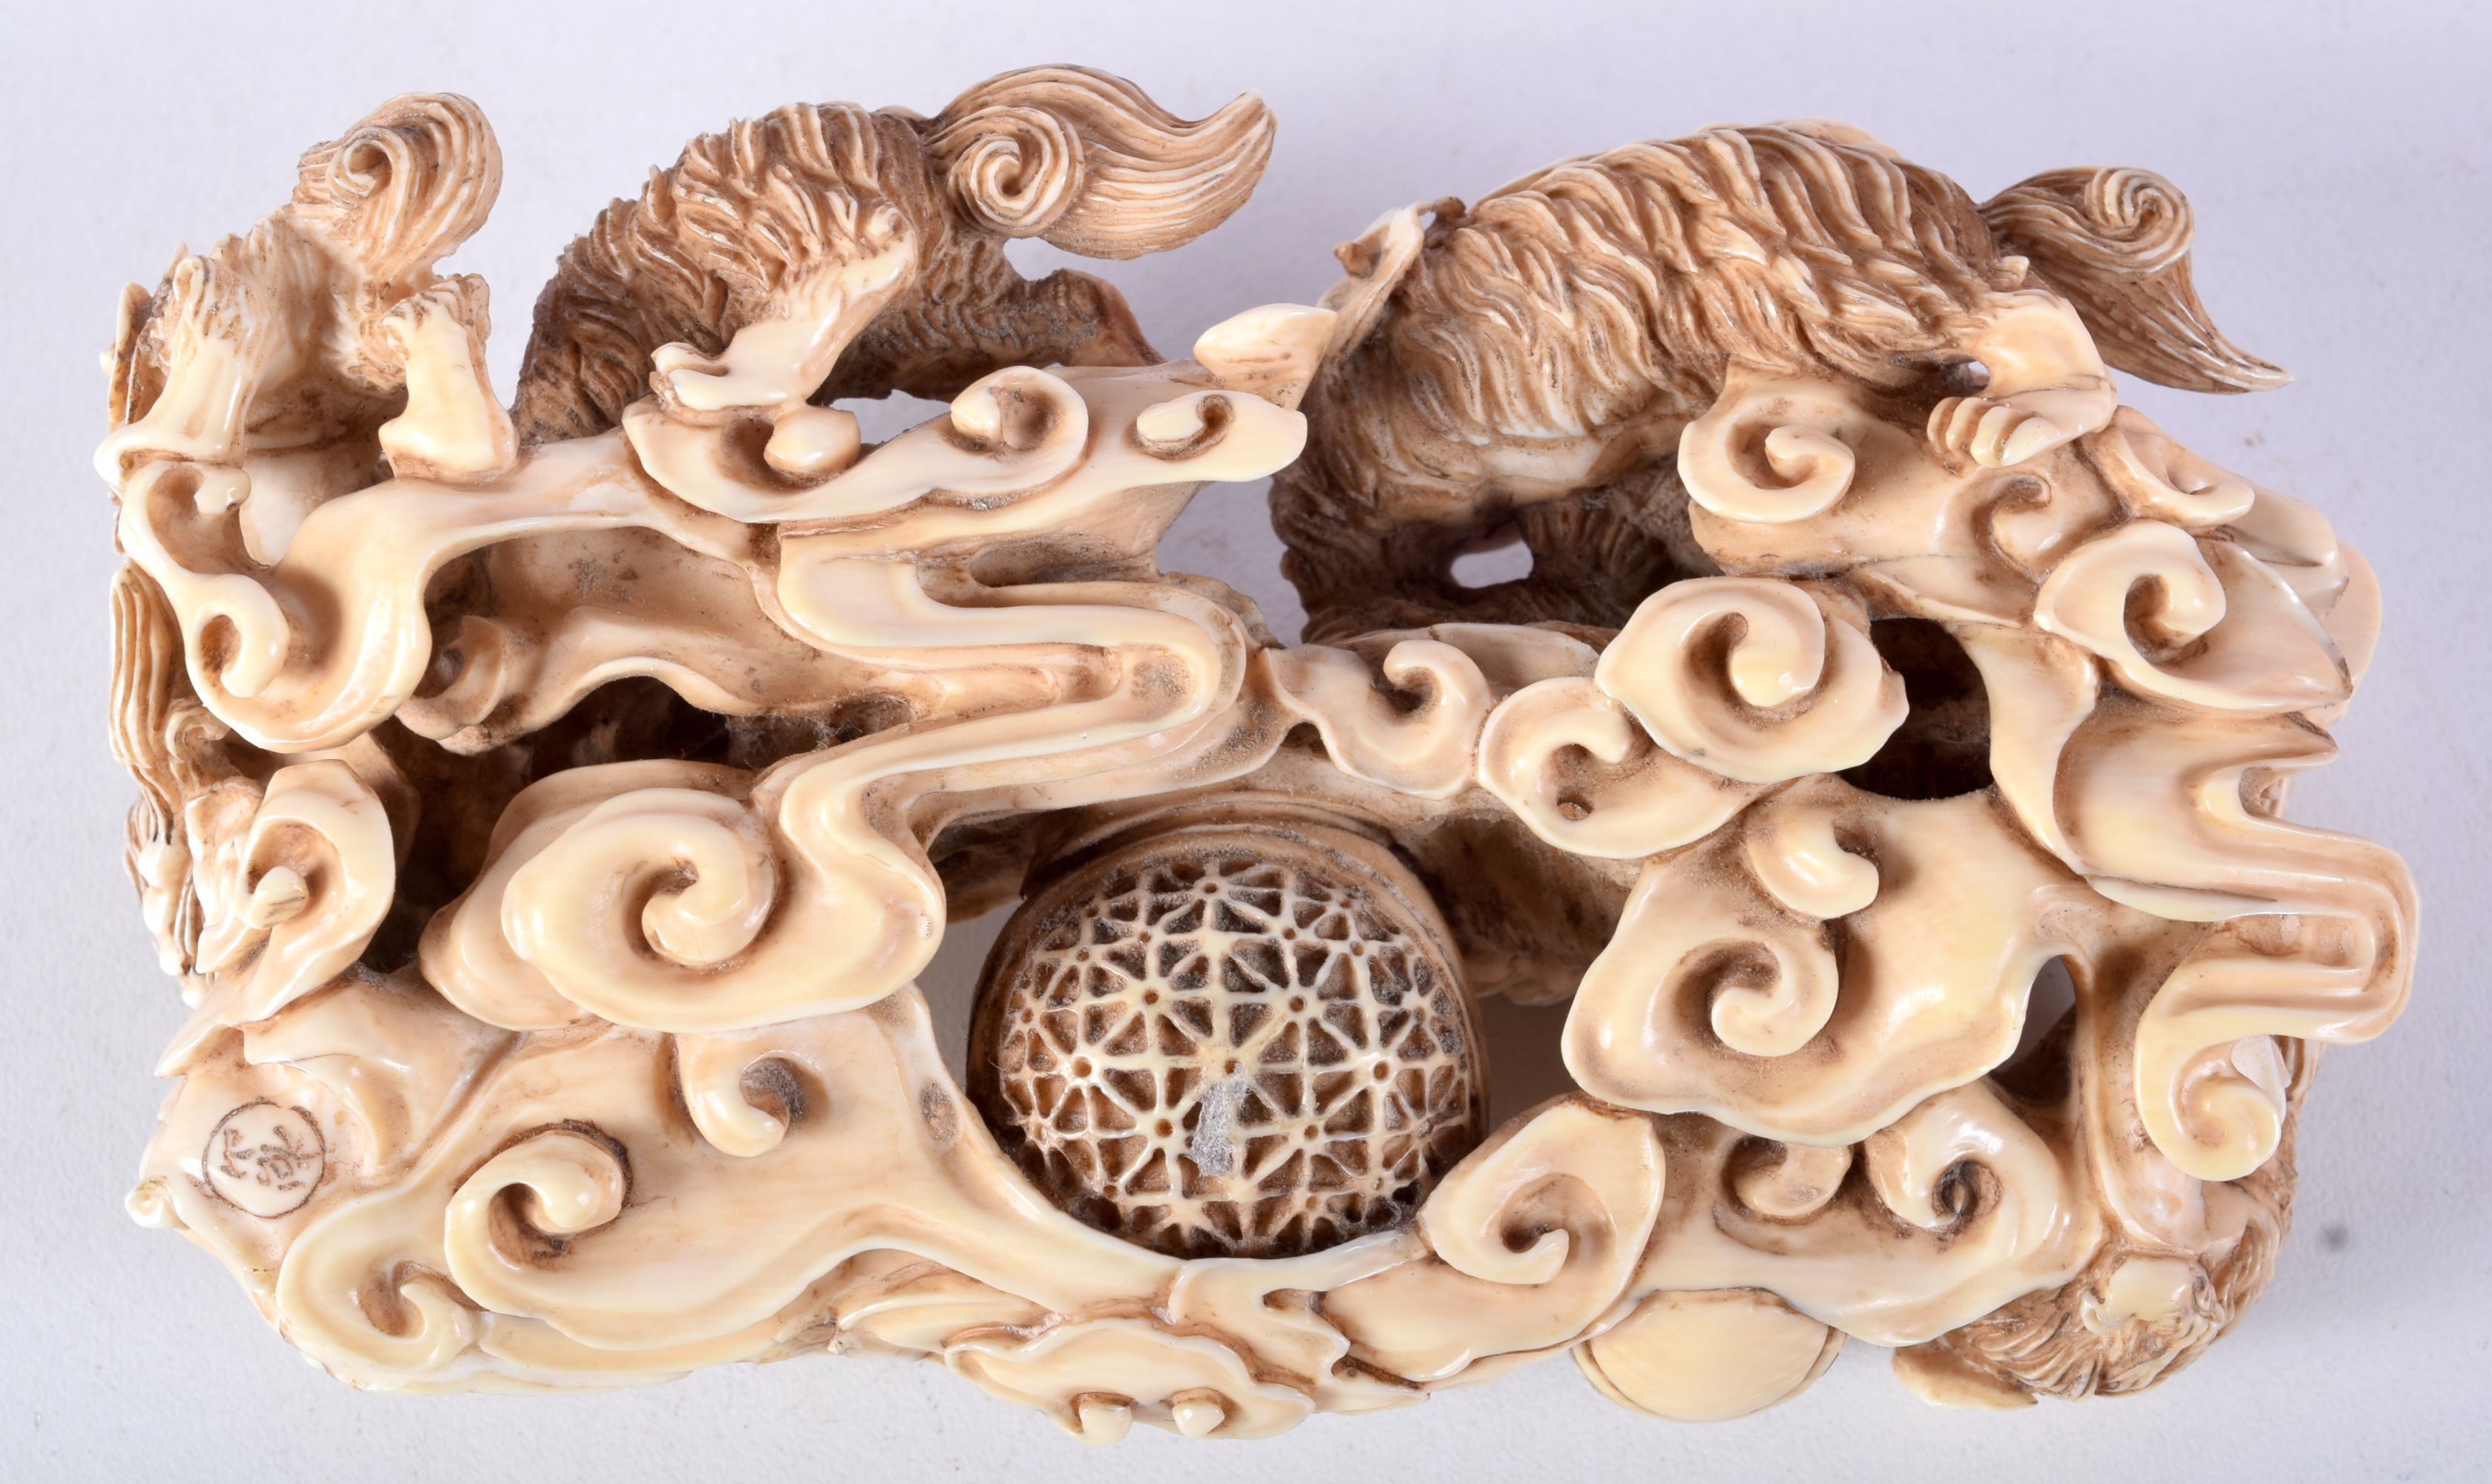 A FINE 19TH CENTURY JAPANESE MEIJI PERIOD CARVED IVORY OKIMONO modelled as numerous beasts in a play - Image 5 of 5